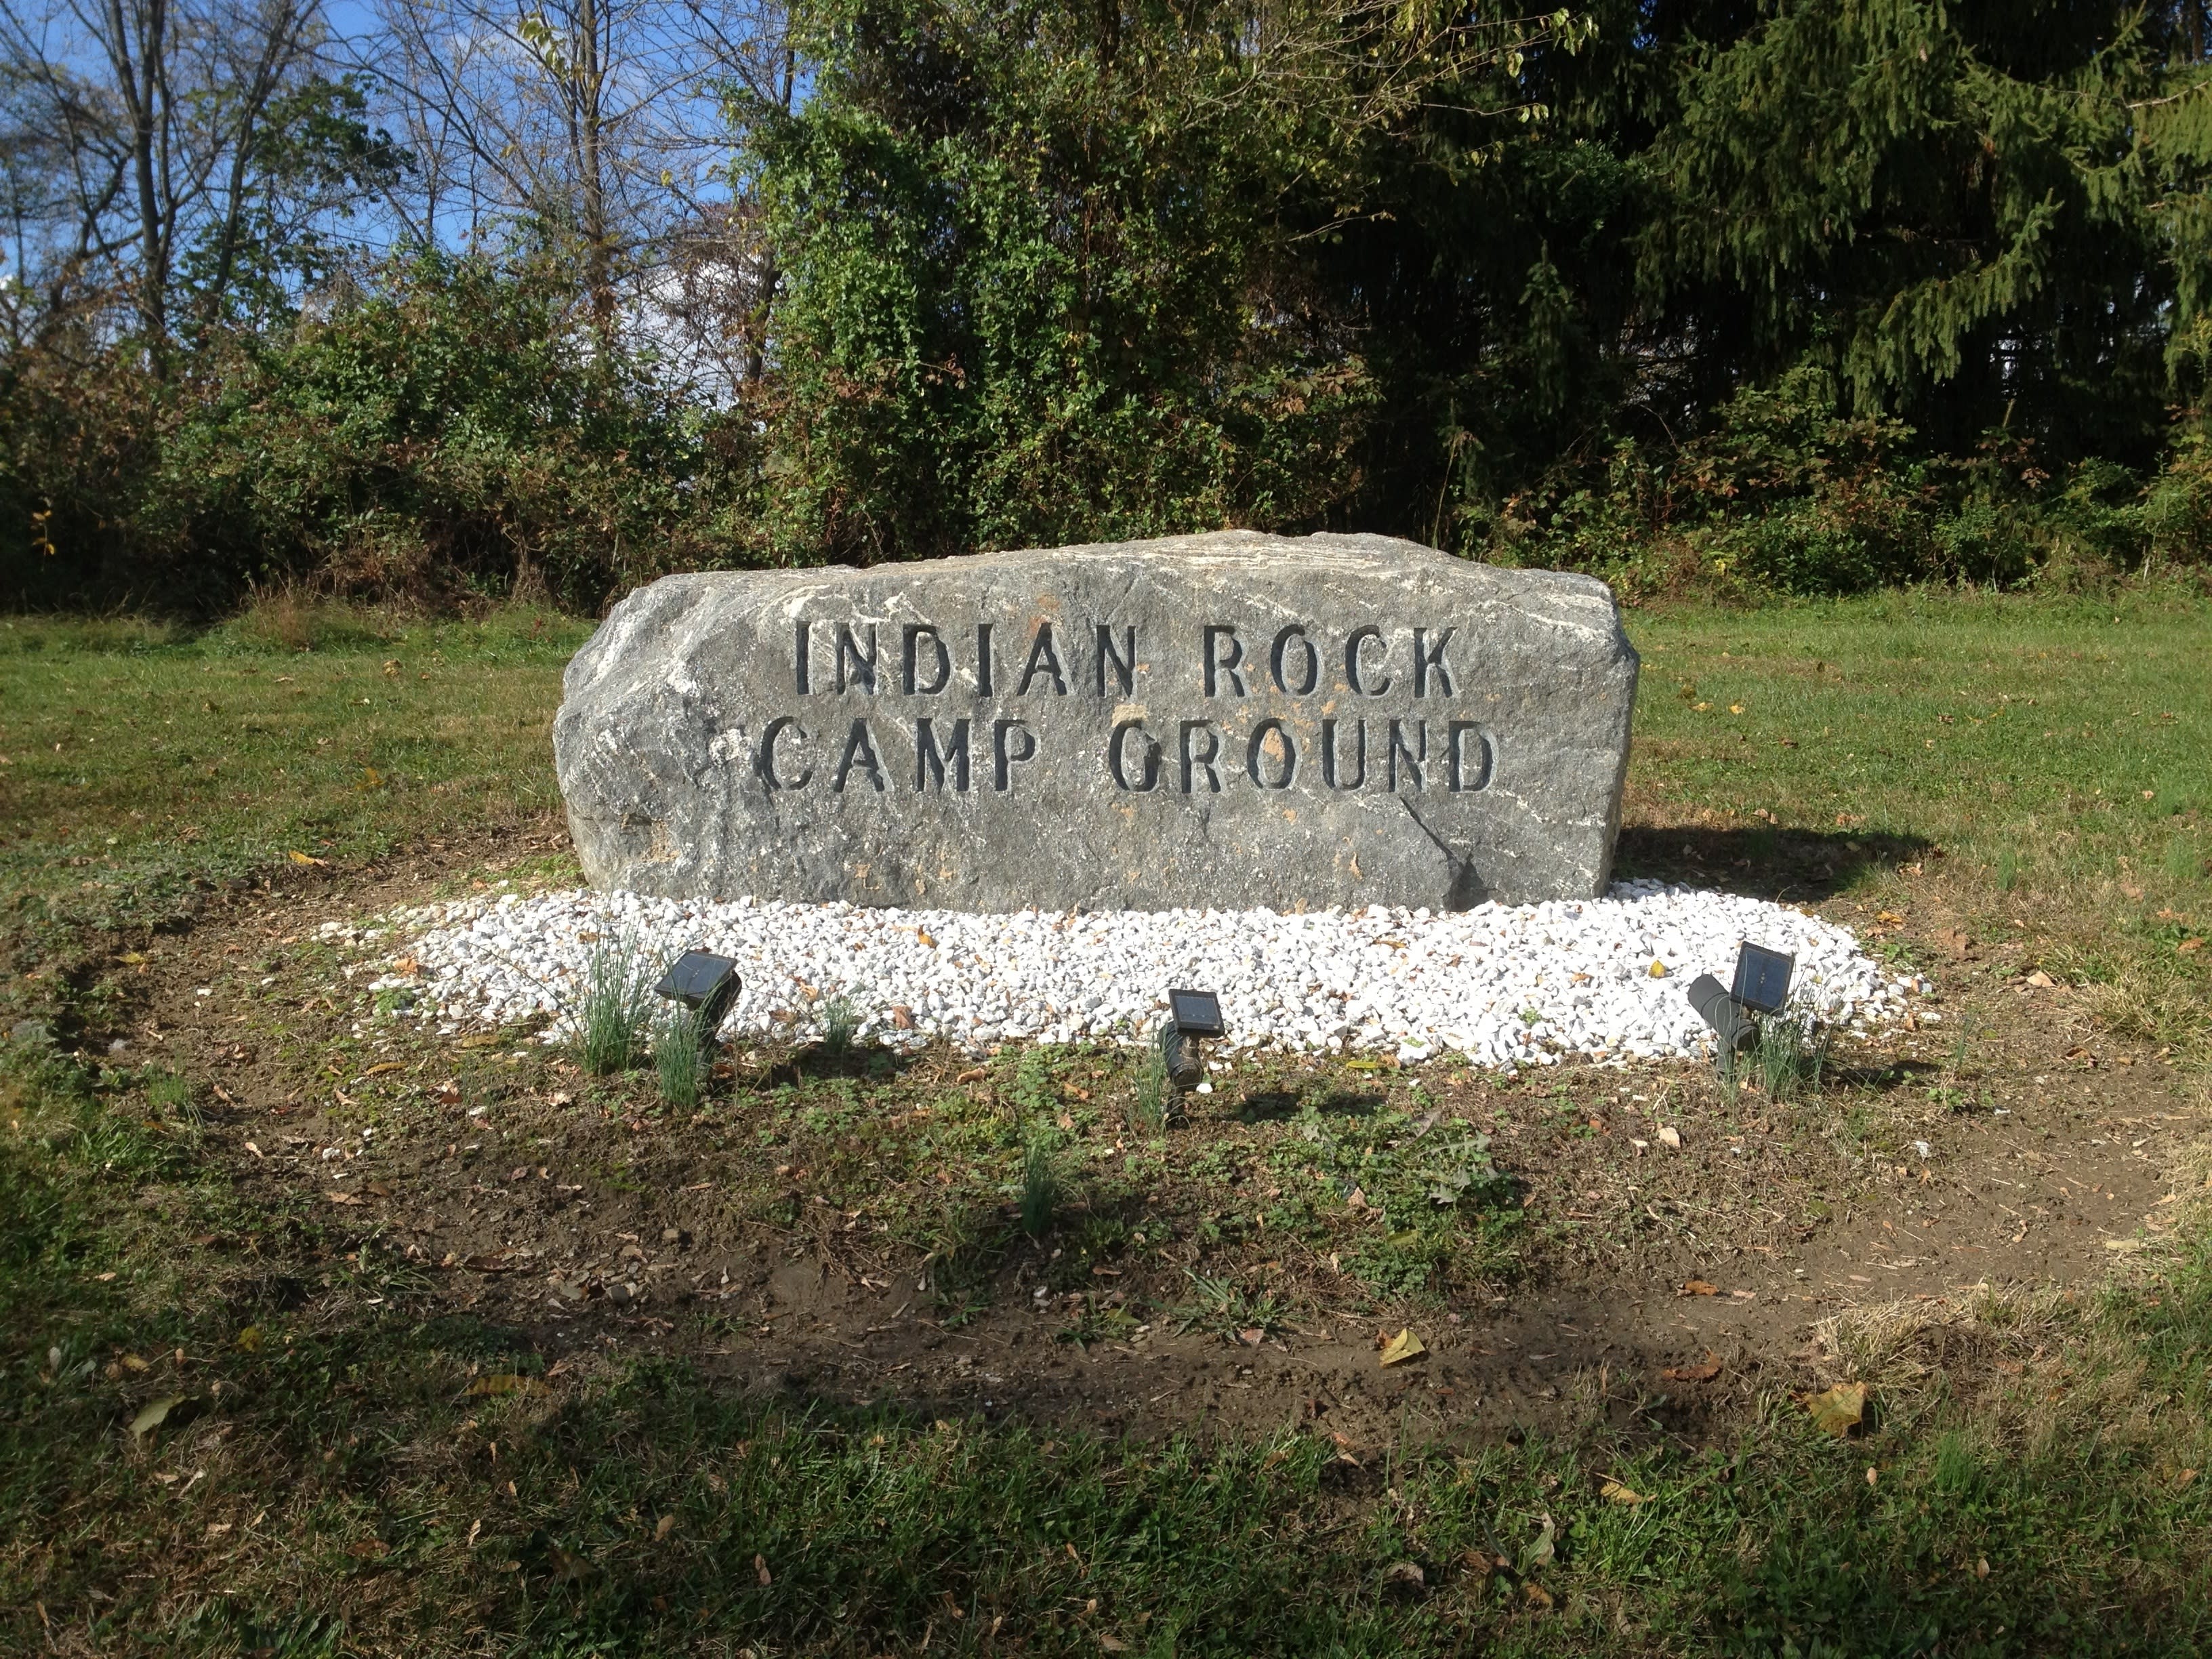 Indian Rock Campground will welcome you and your pooch.